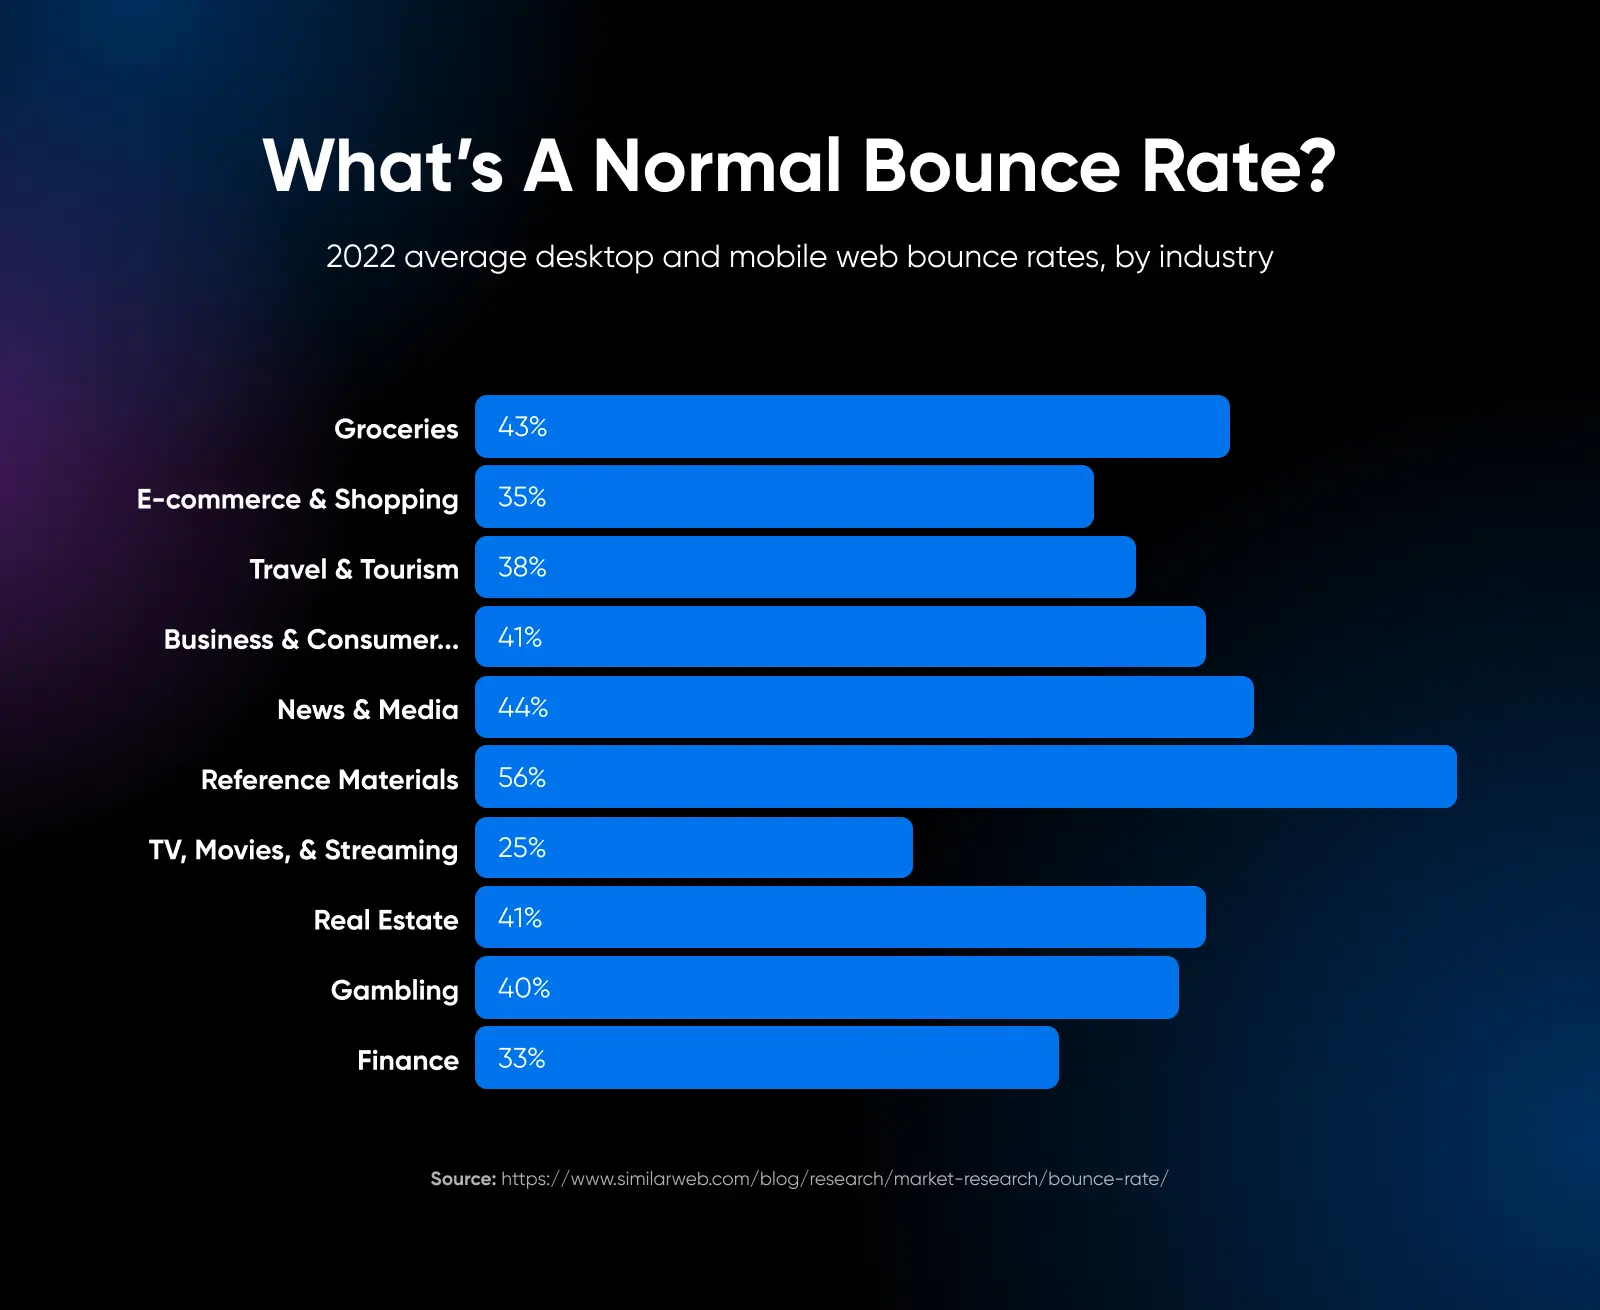 A blue horizontal bar graph shows 2022 average desktop and mobile web bounce rates by industry